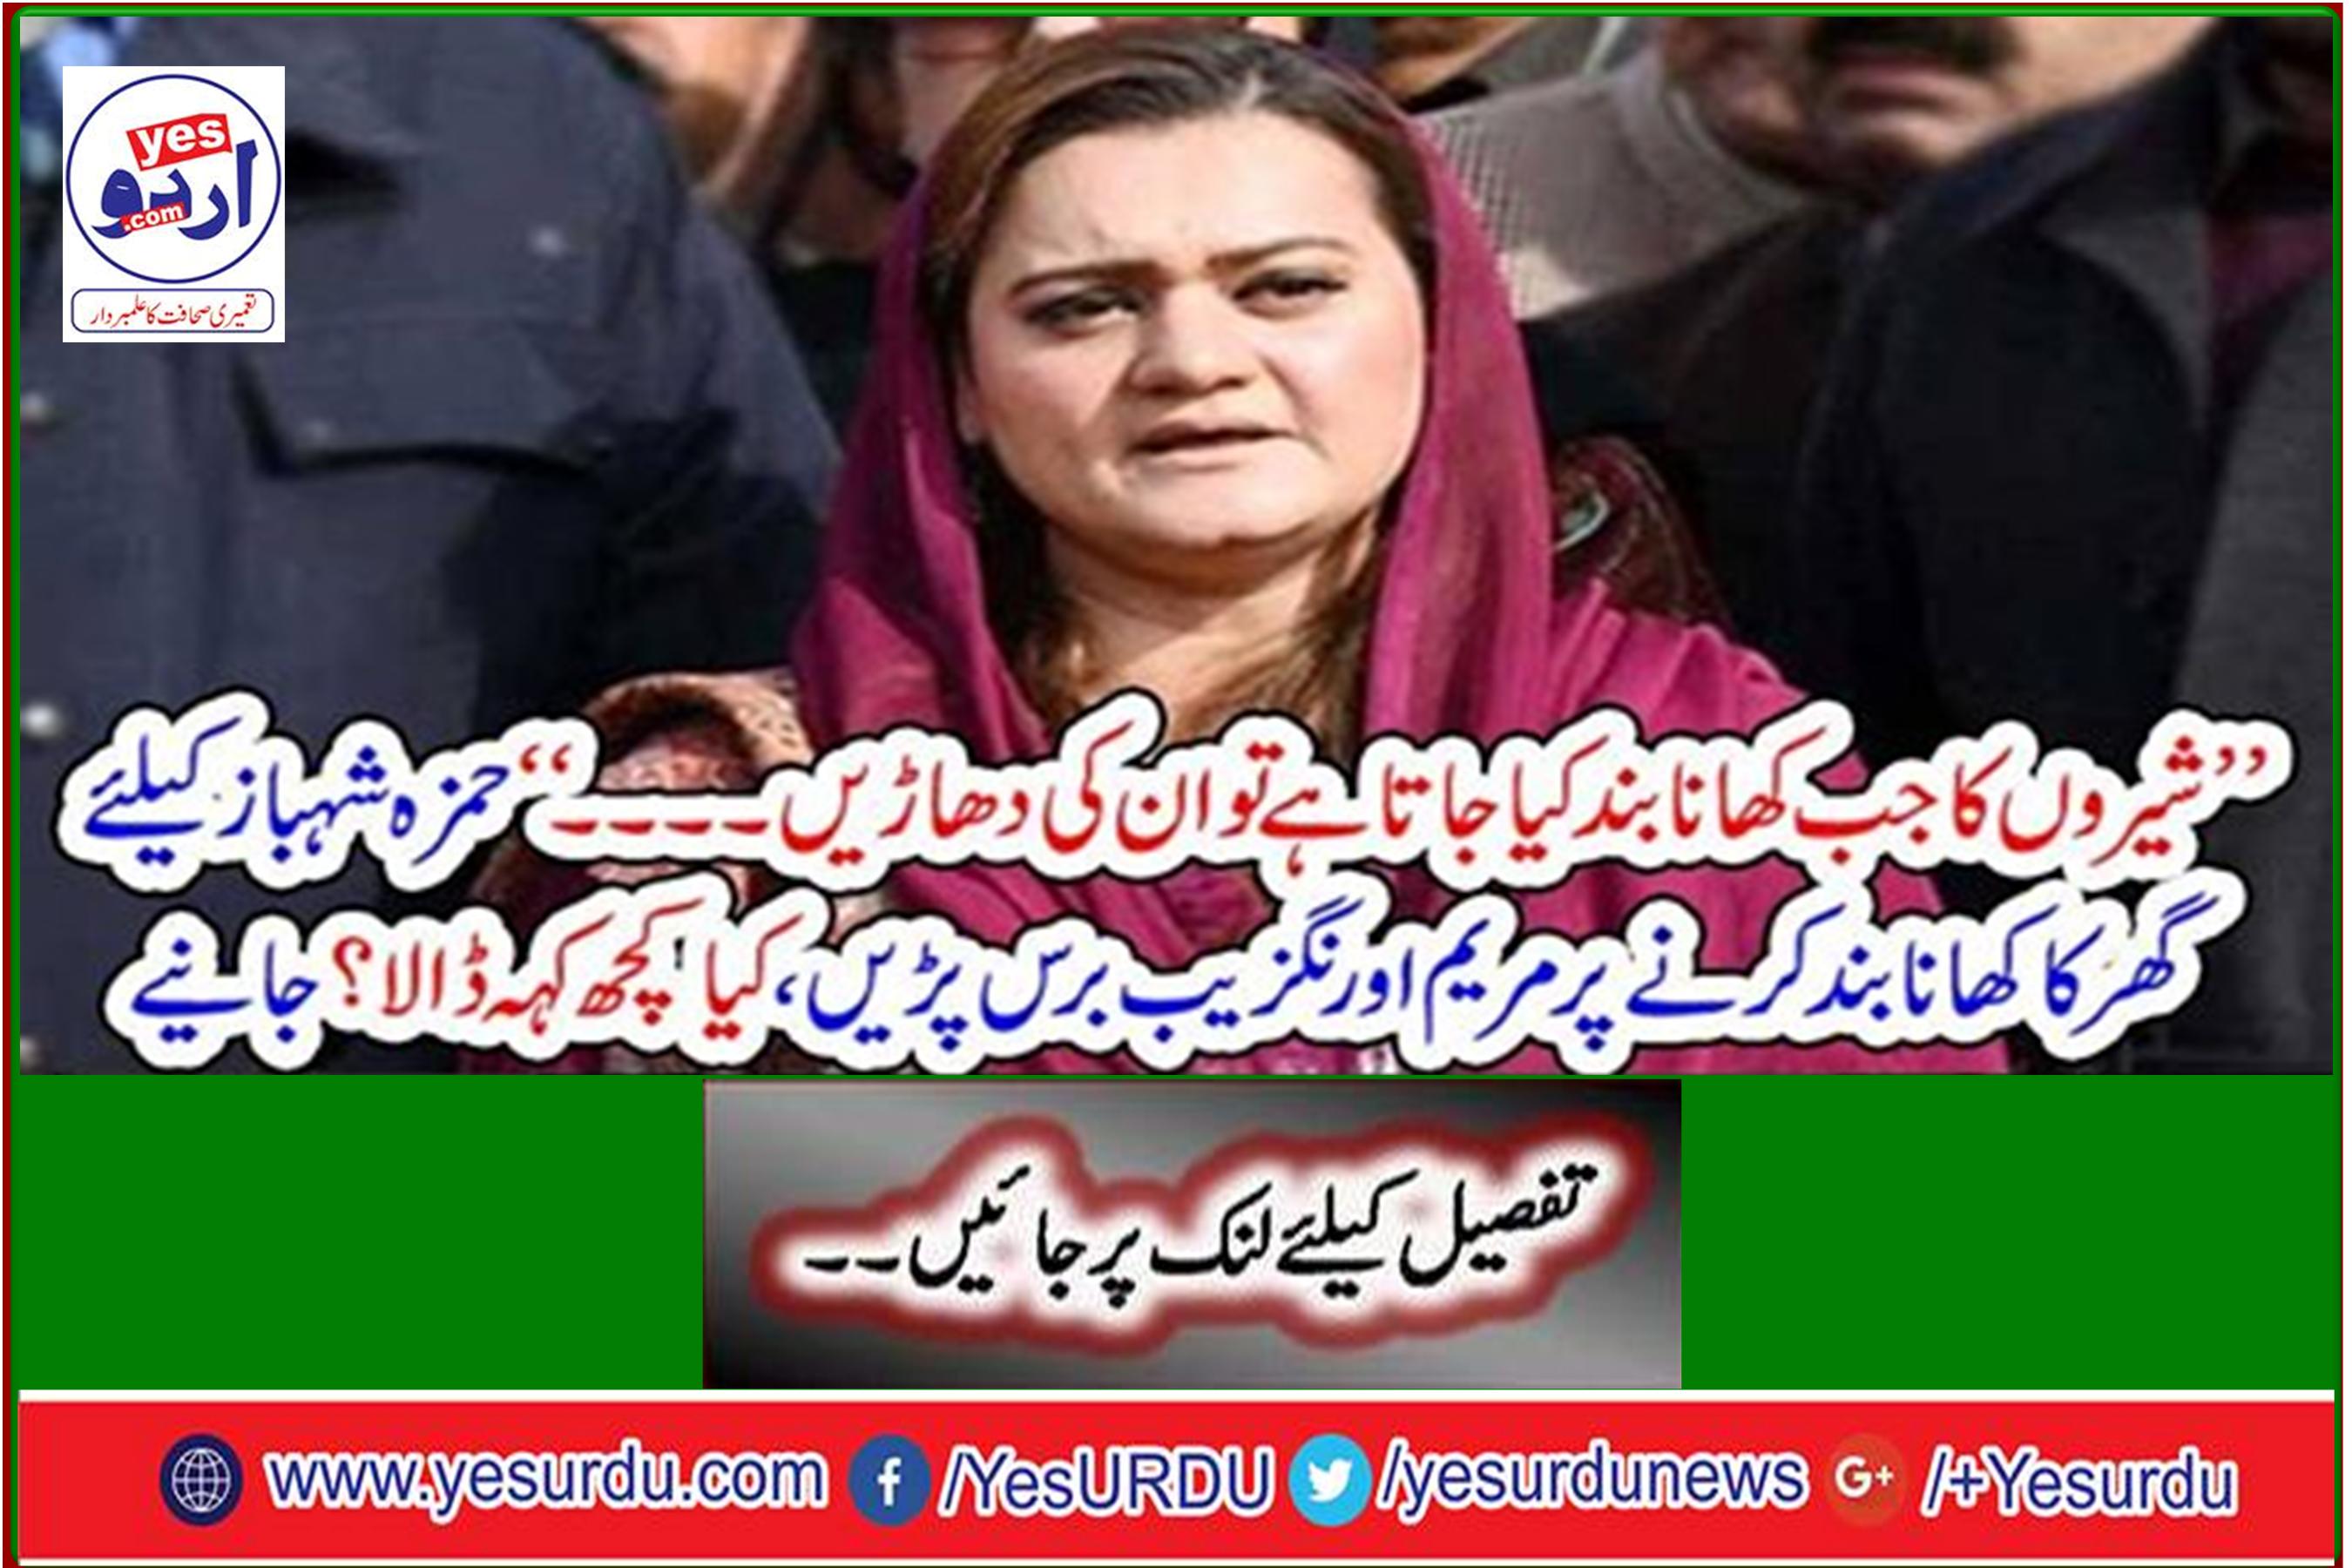 Maryam Aurangzeb year after closing the house for Hamza Shahbaz, said something? Learn